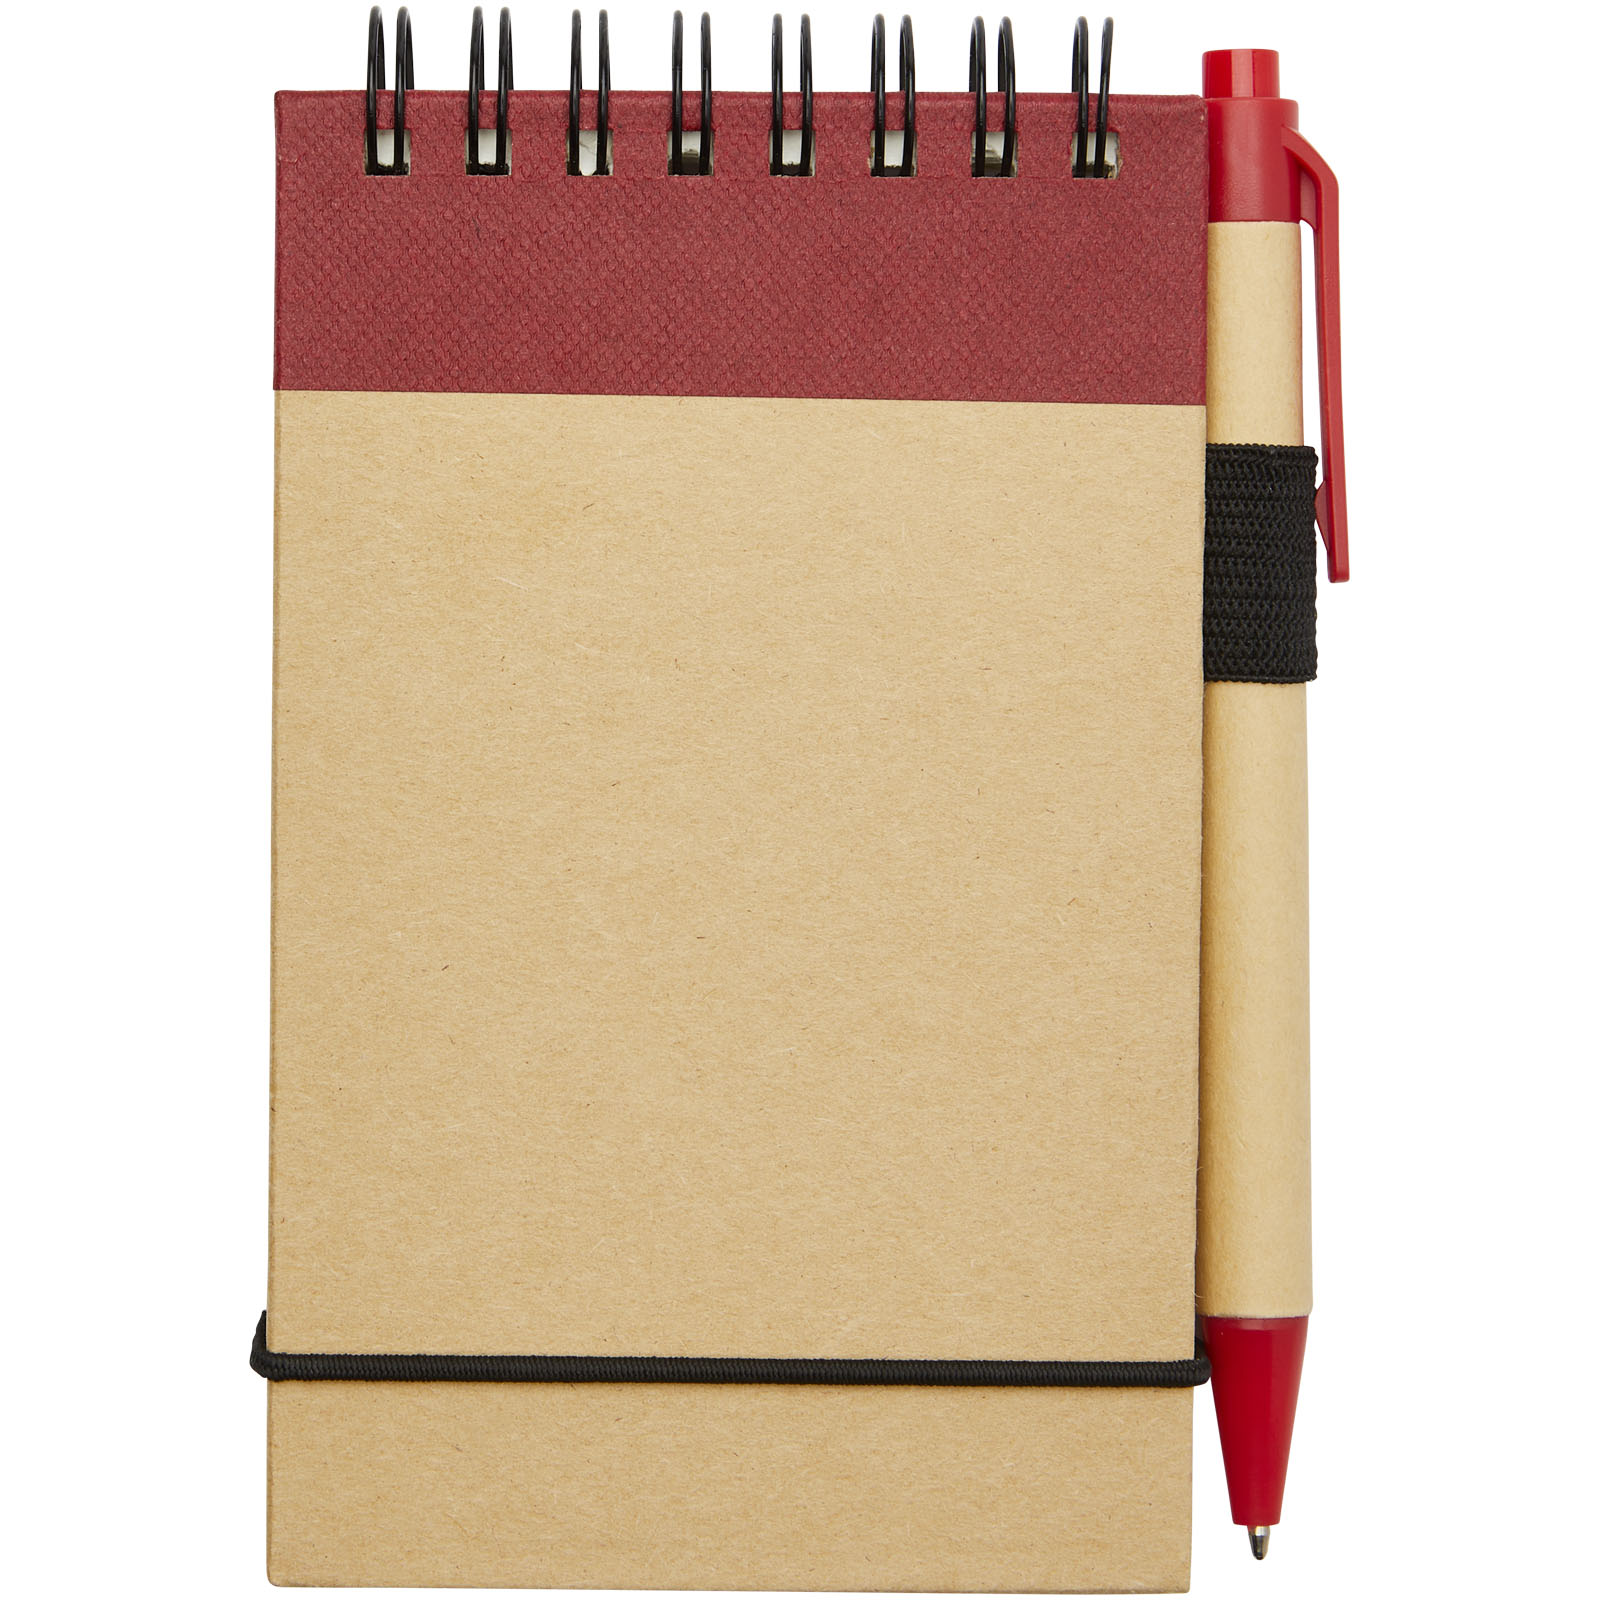 Advertising Hard cover notebooks - Zuse A7 recycled jotter notepad with pen - 1